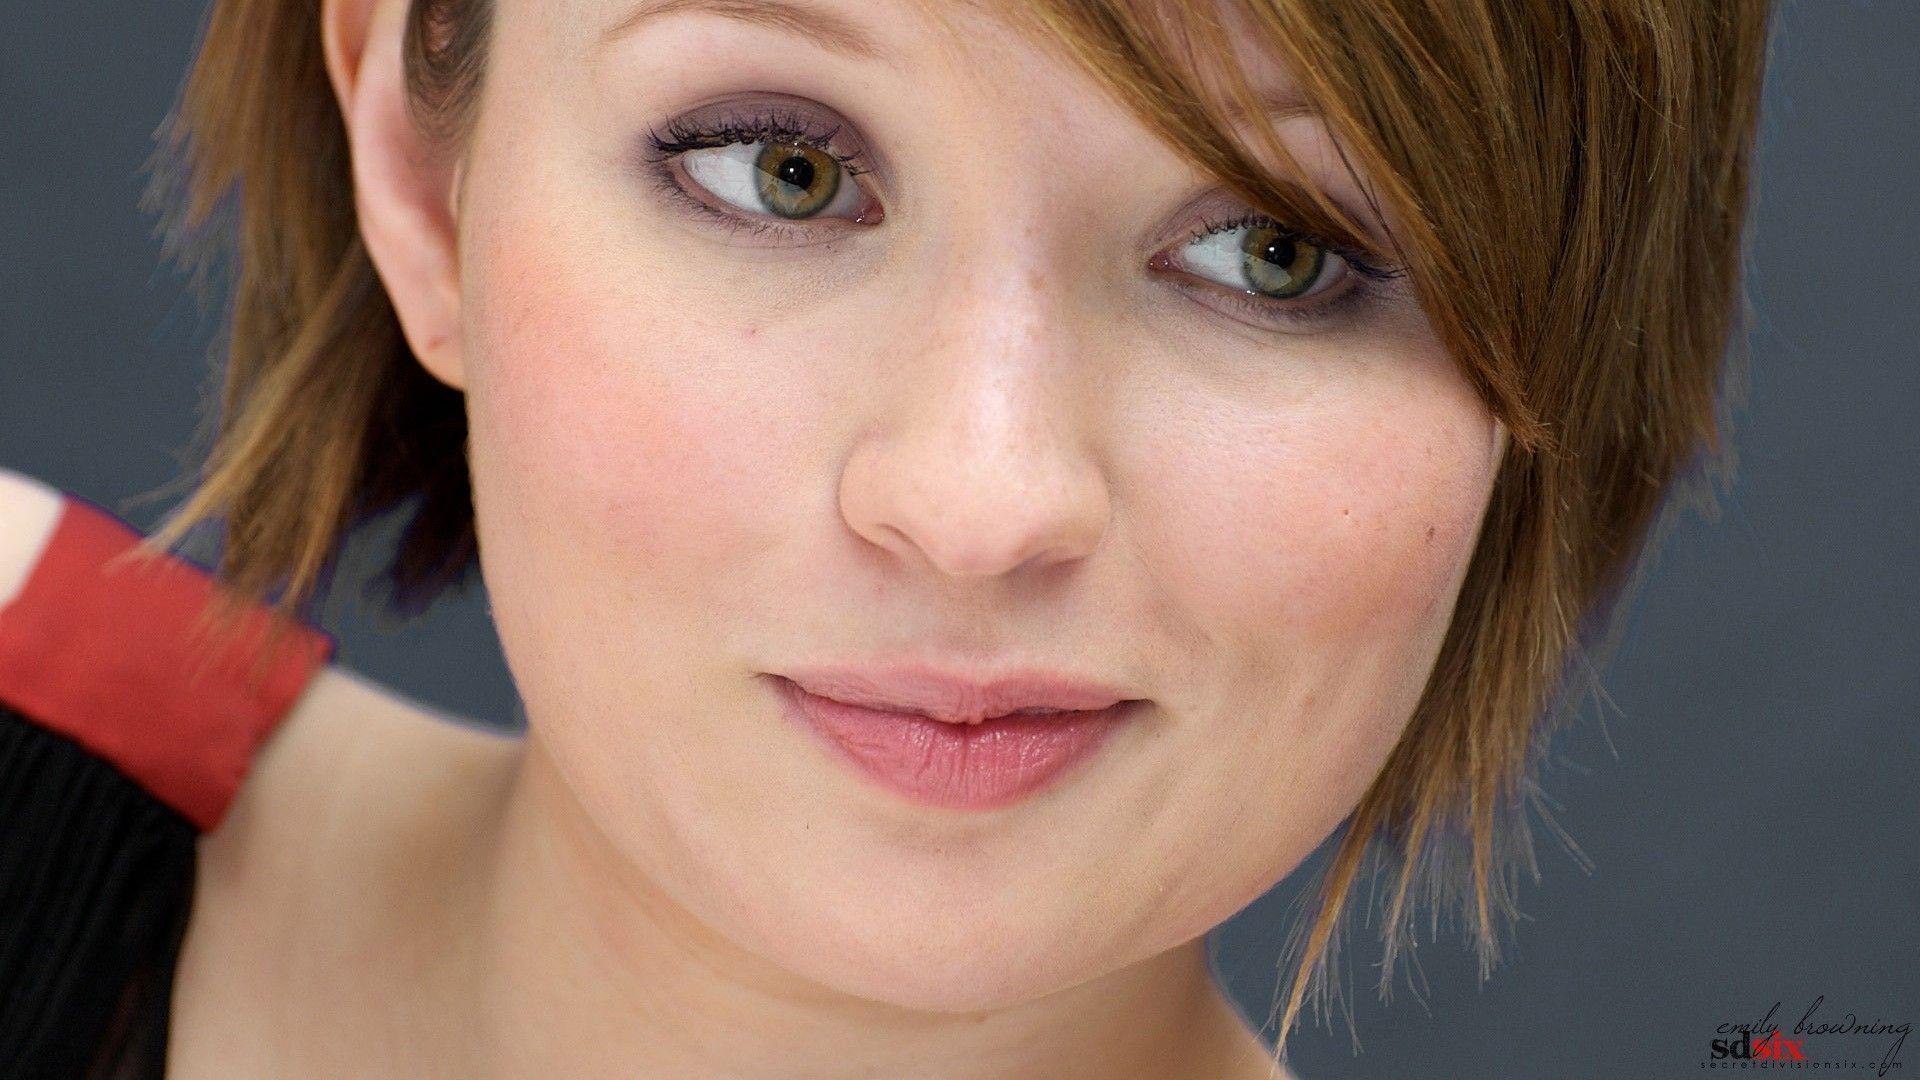 Beauty Emily Browning Image 08. hdwallpaper